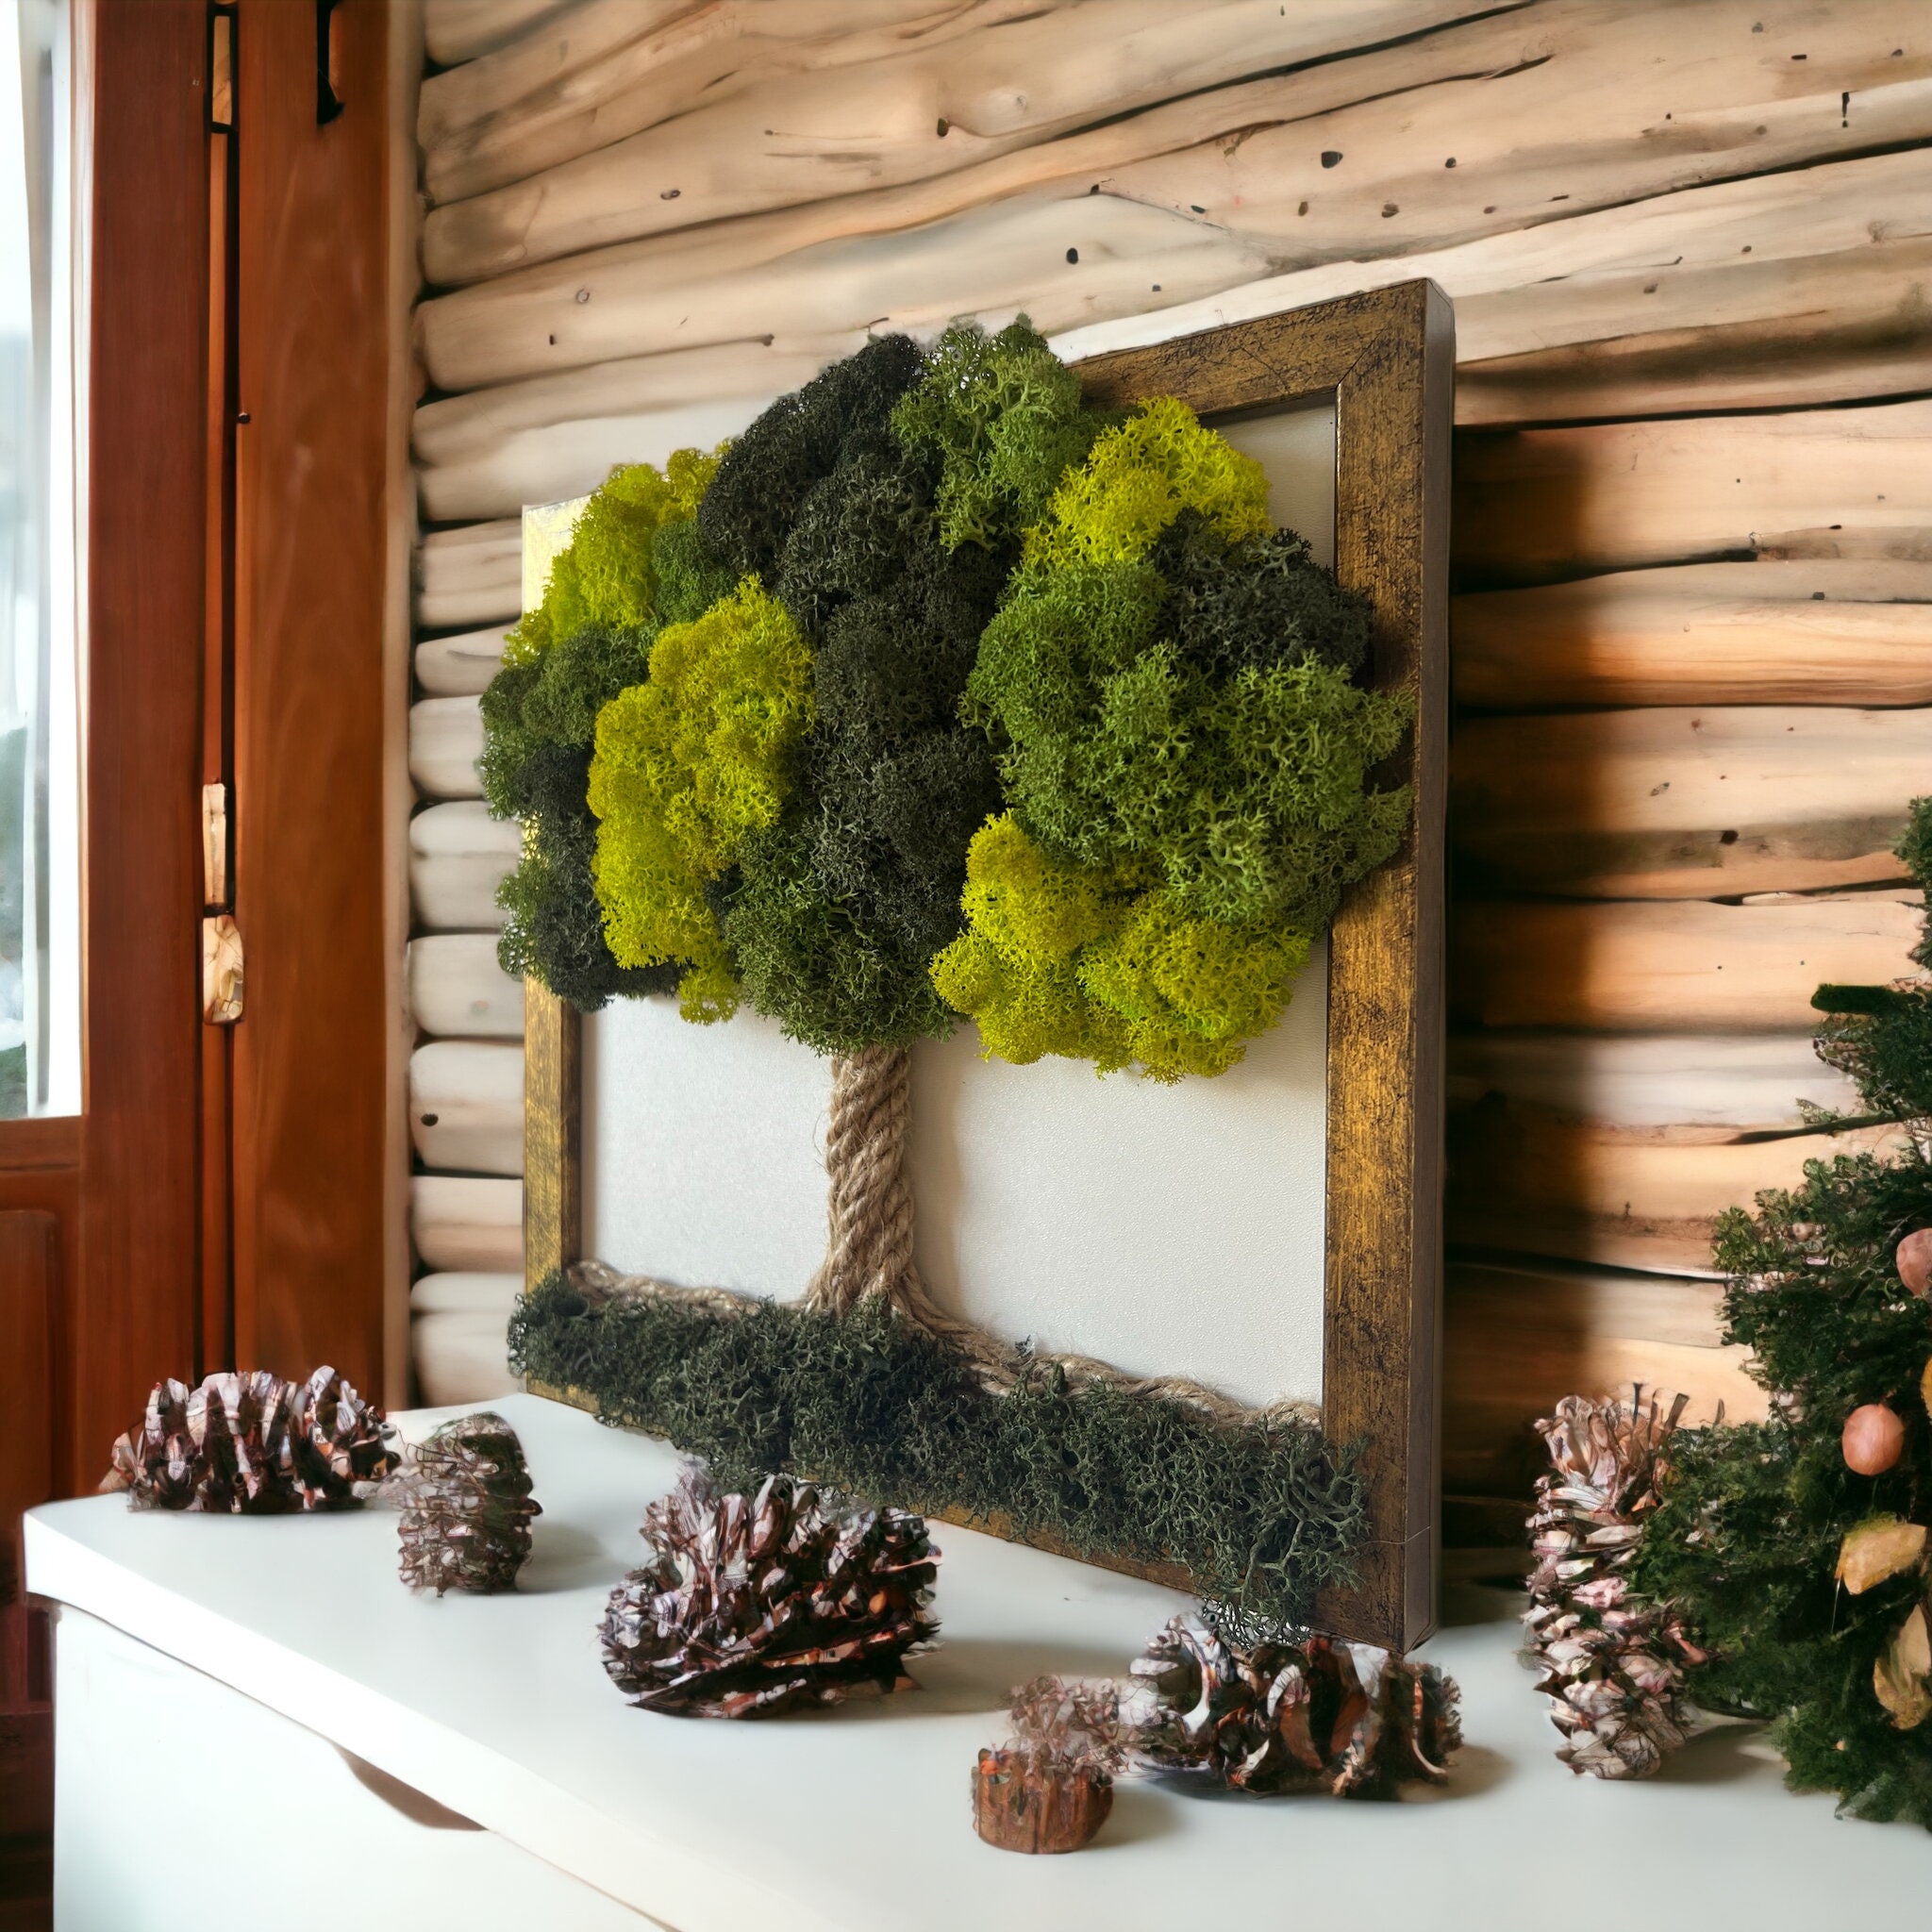 Preserved Moss Wall Decor Real Preserved Moss No Maintenance Required Naturally Preserved Moss For Home Wall Party Festivals Crafts Xmas Indoor Office